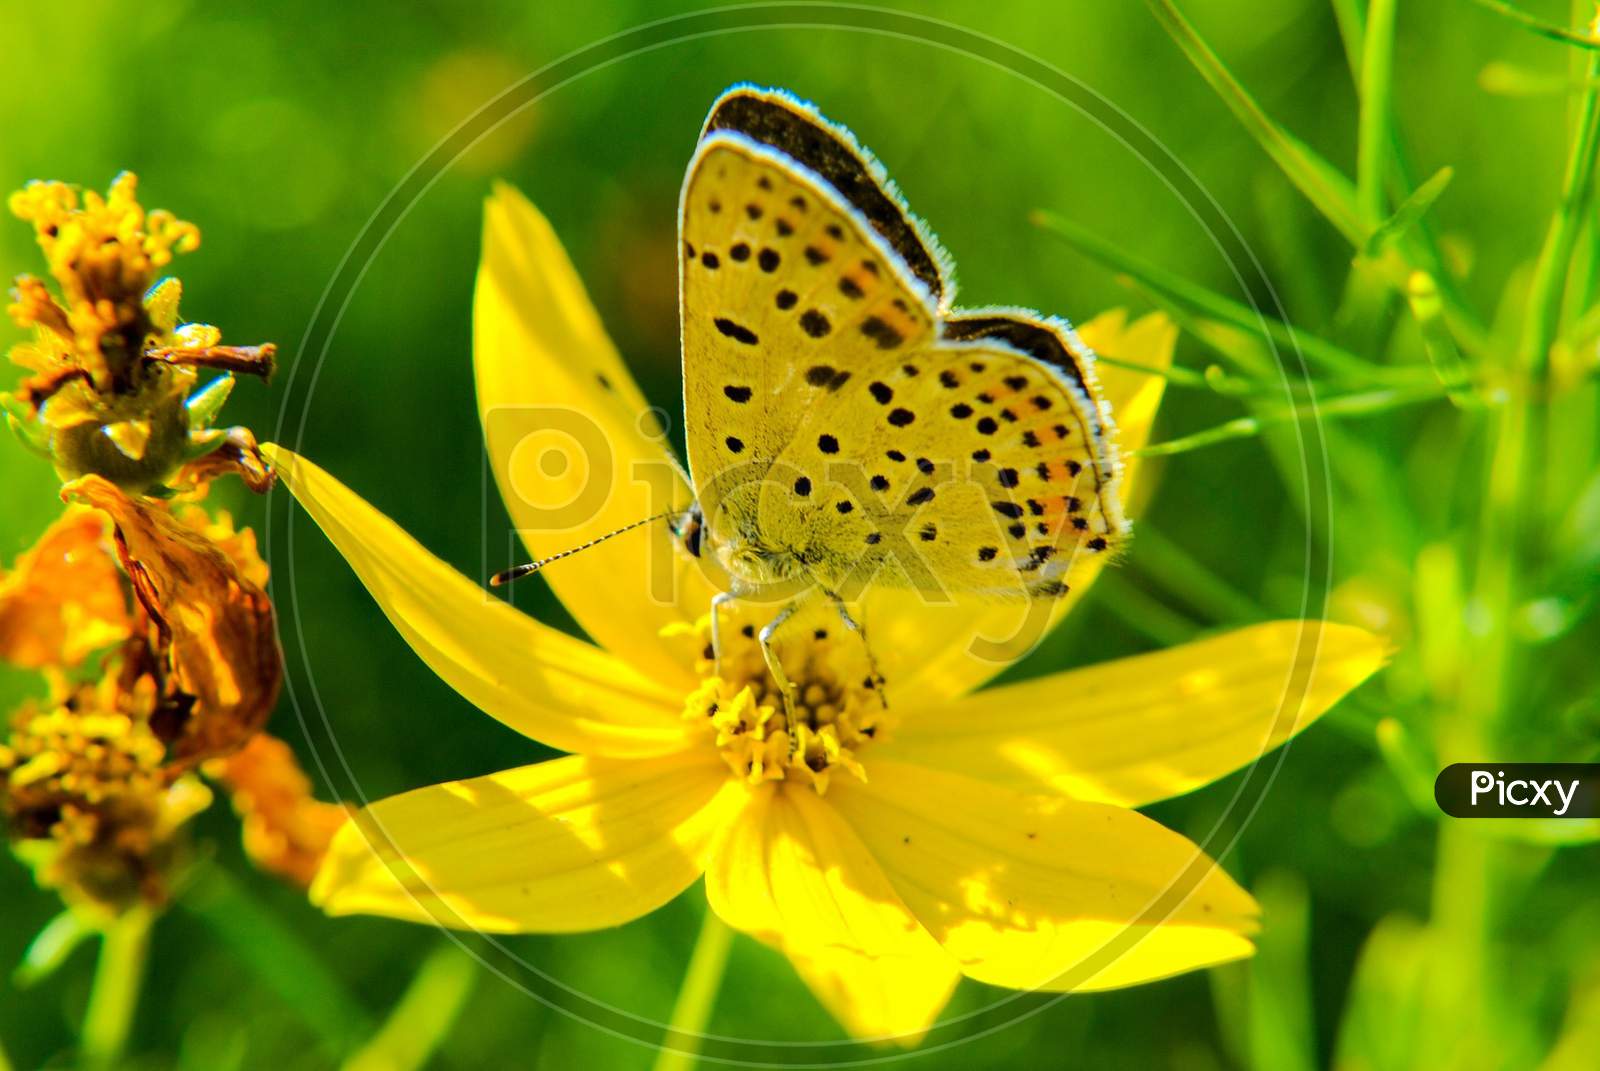 Butterfly taking nectar from the flower